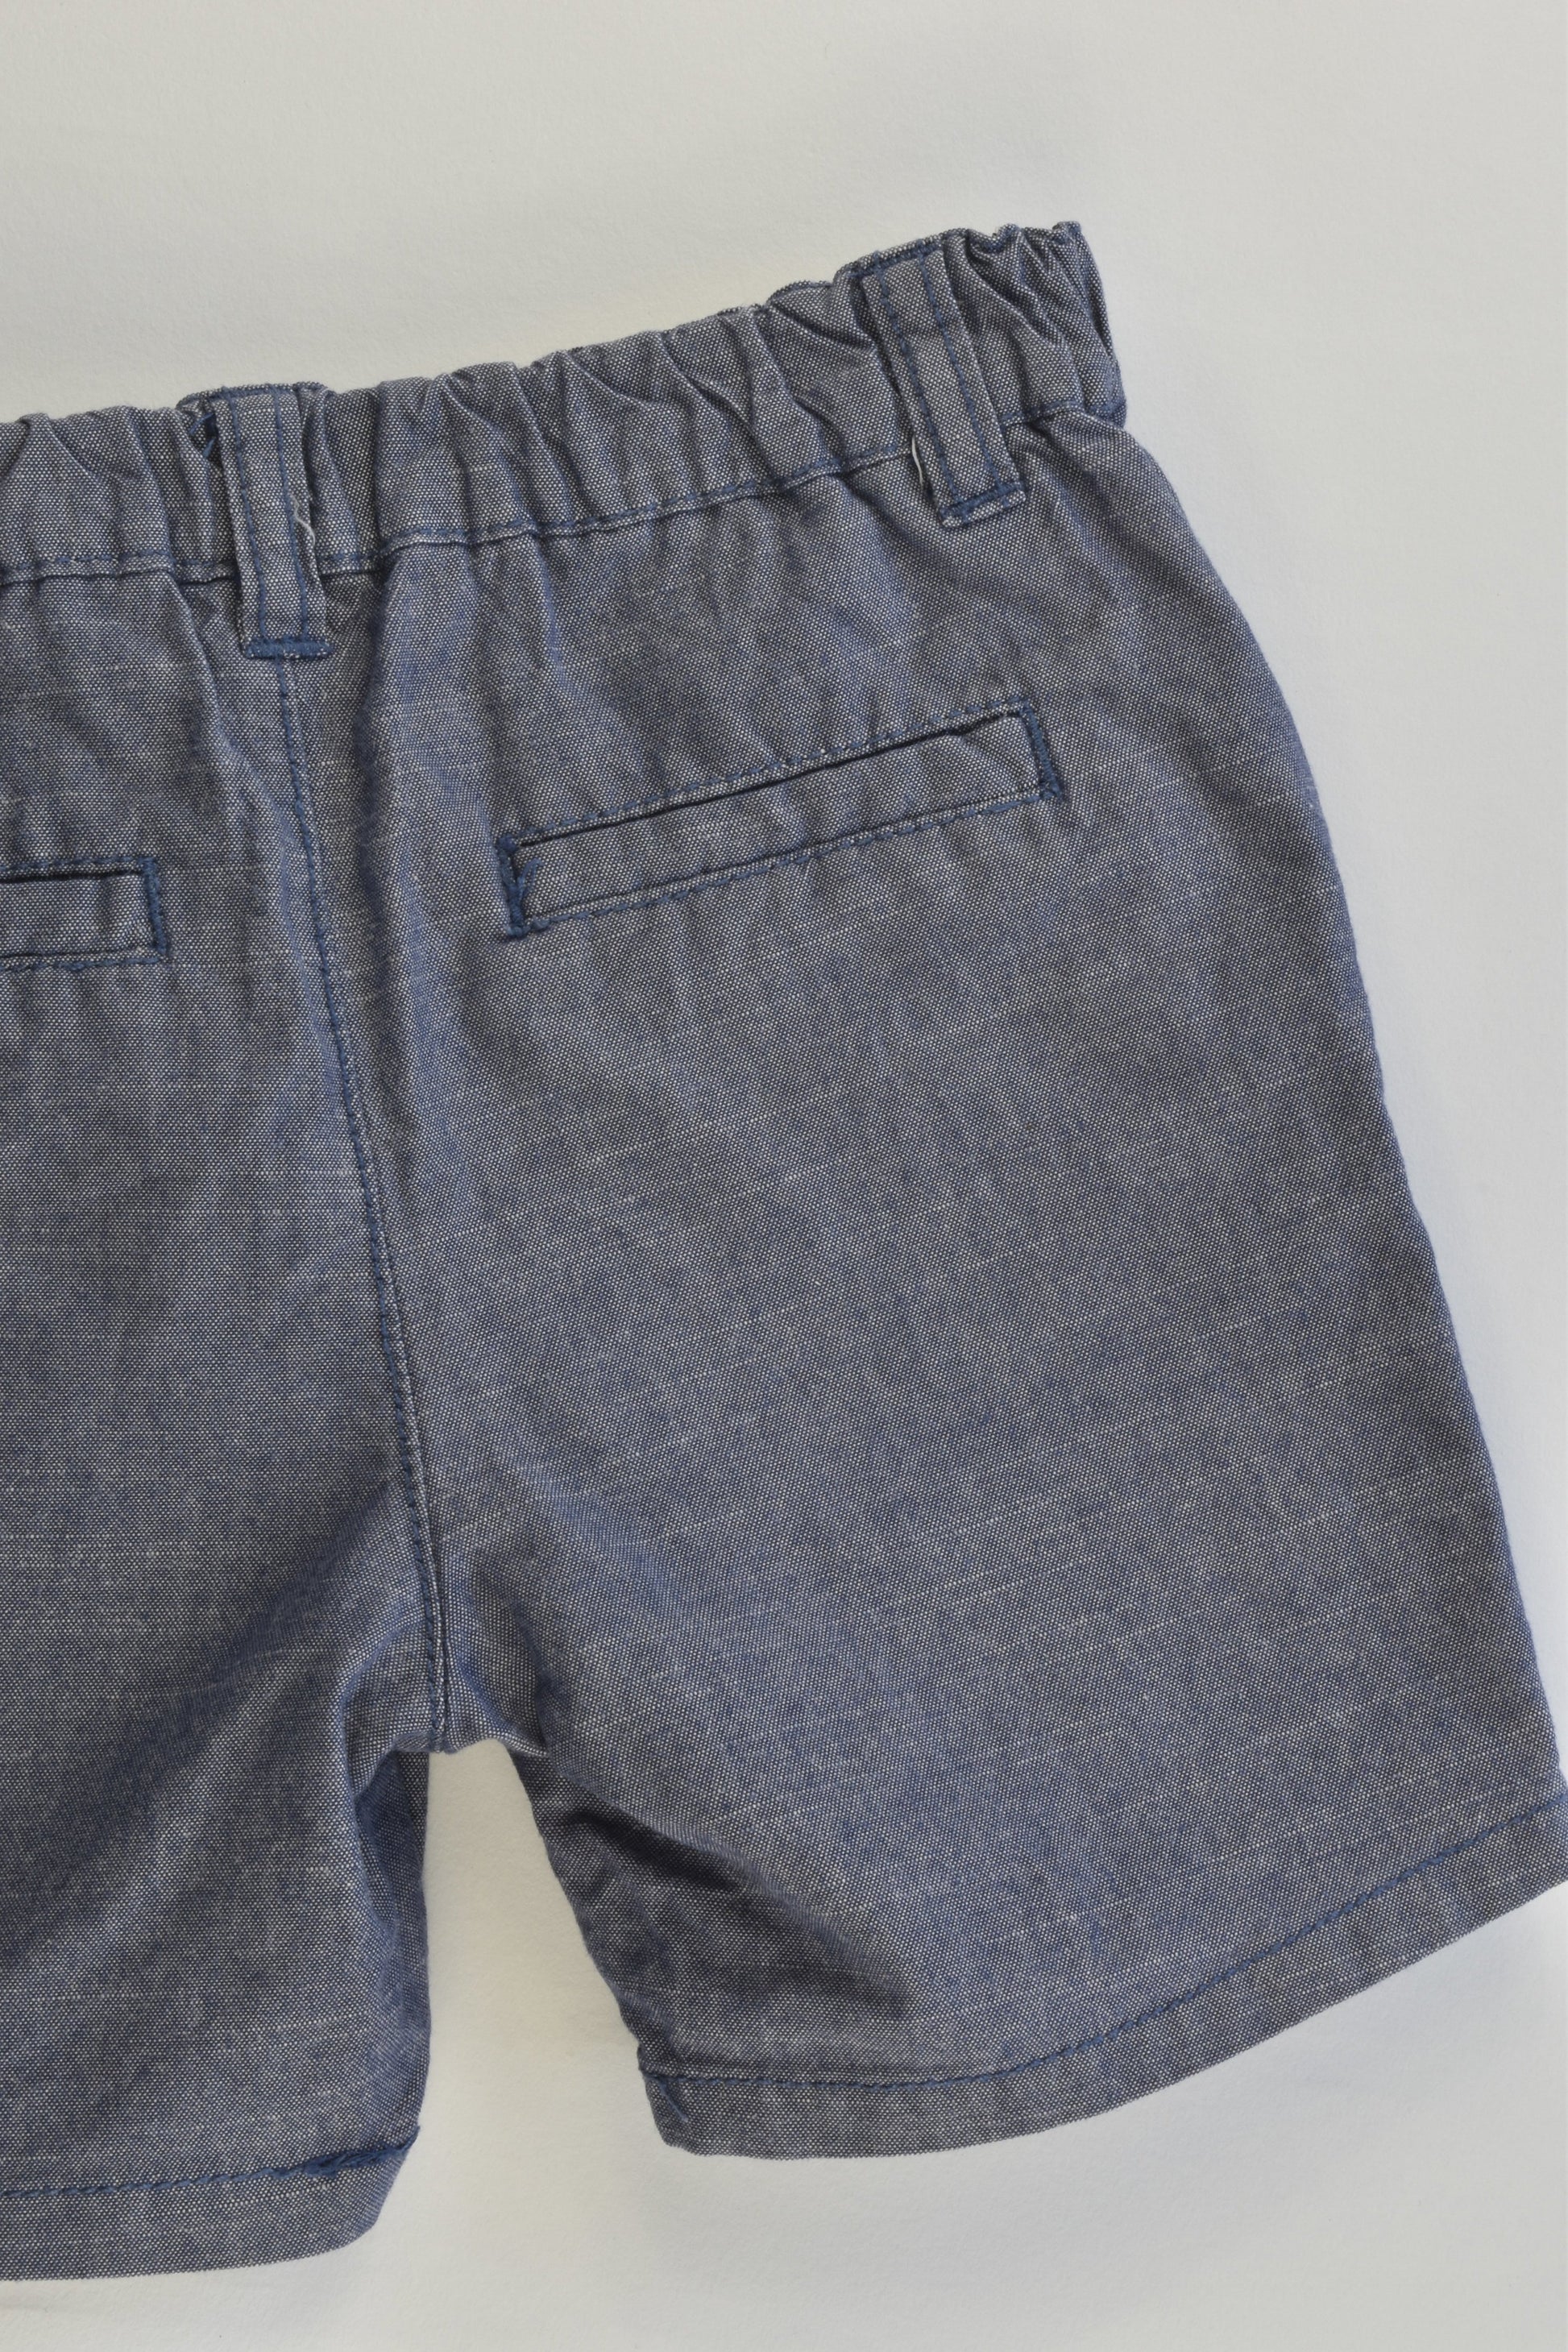 Target Size 1 (12-18 months) Shorts